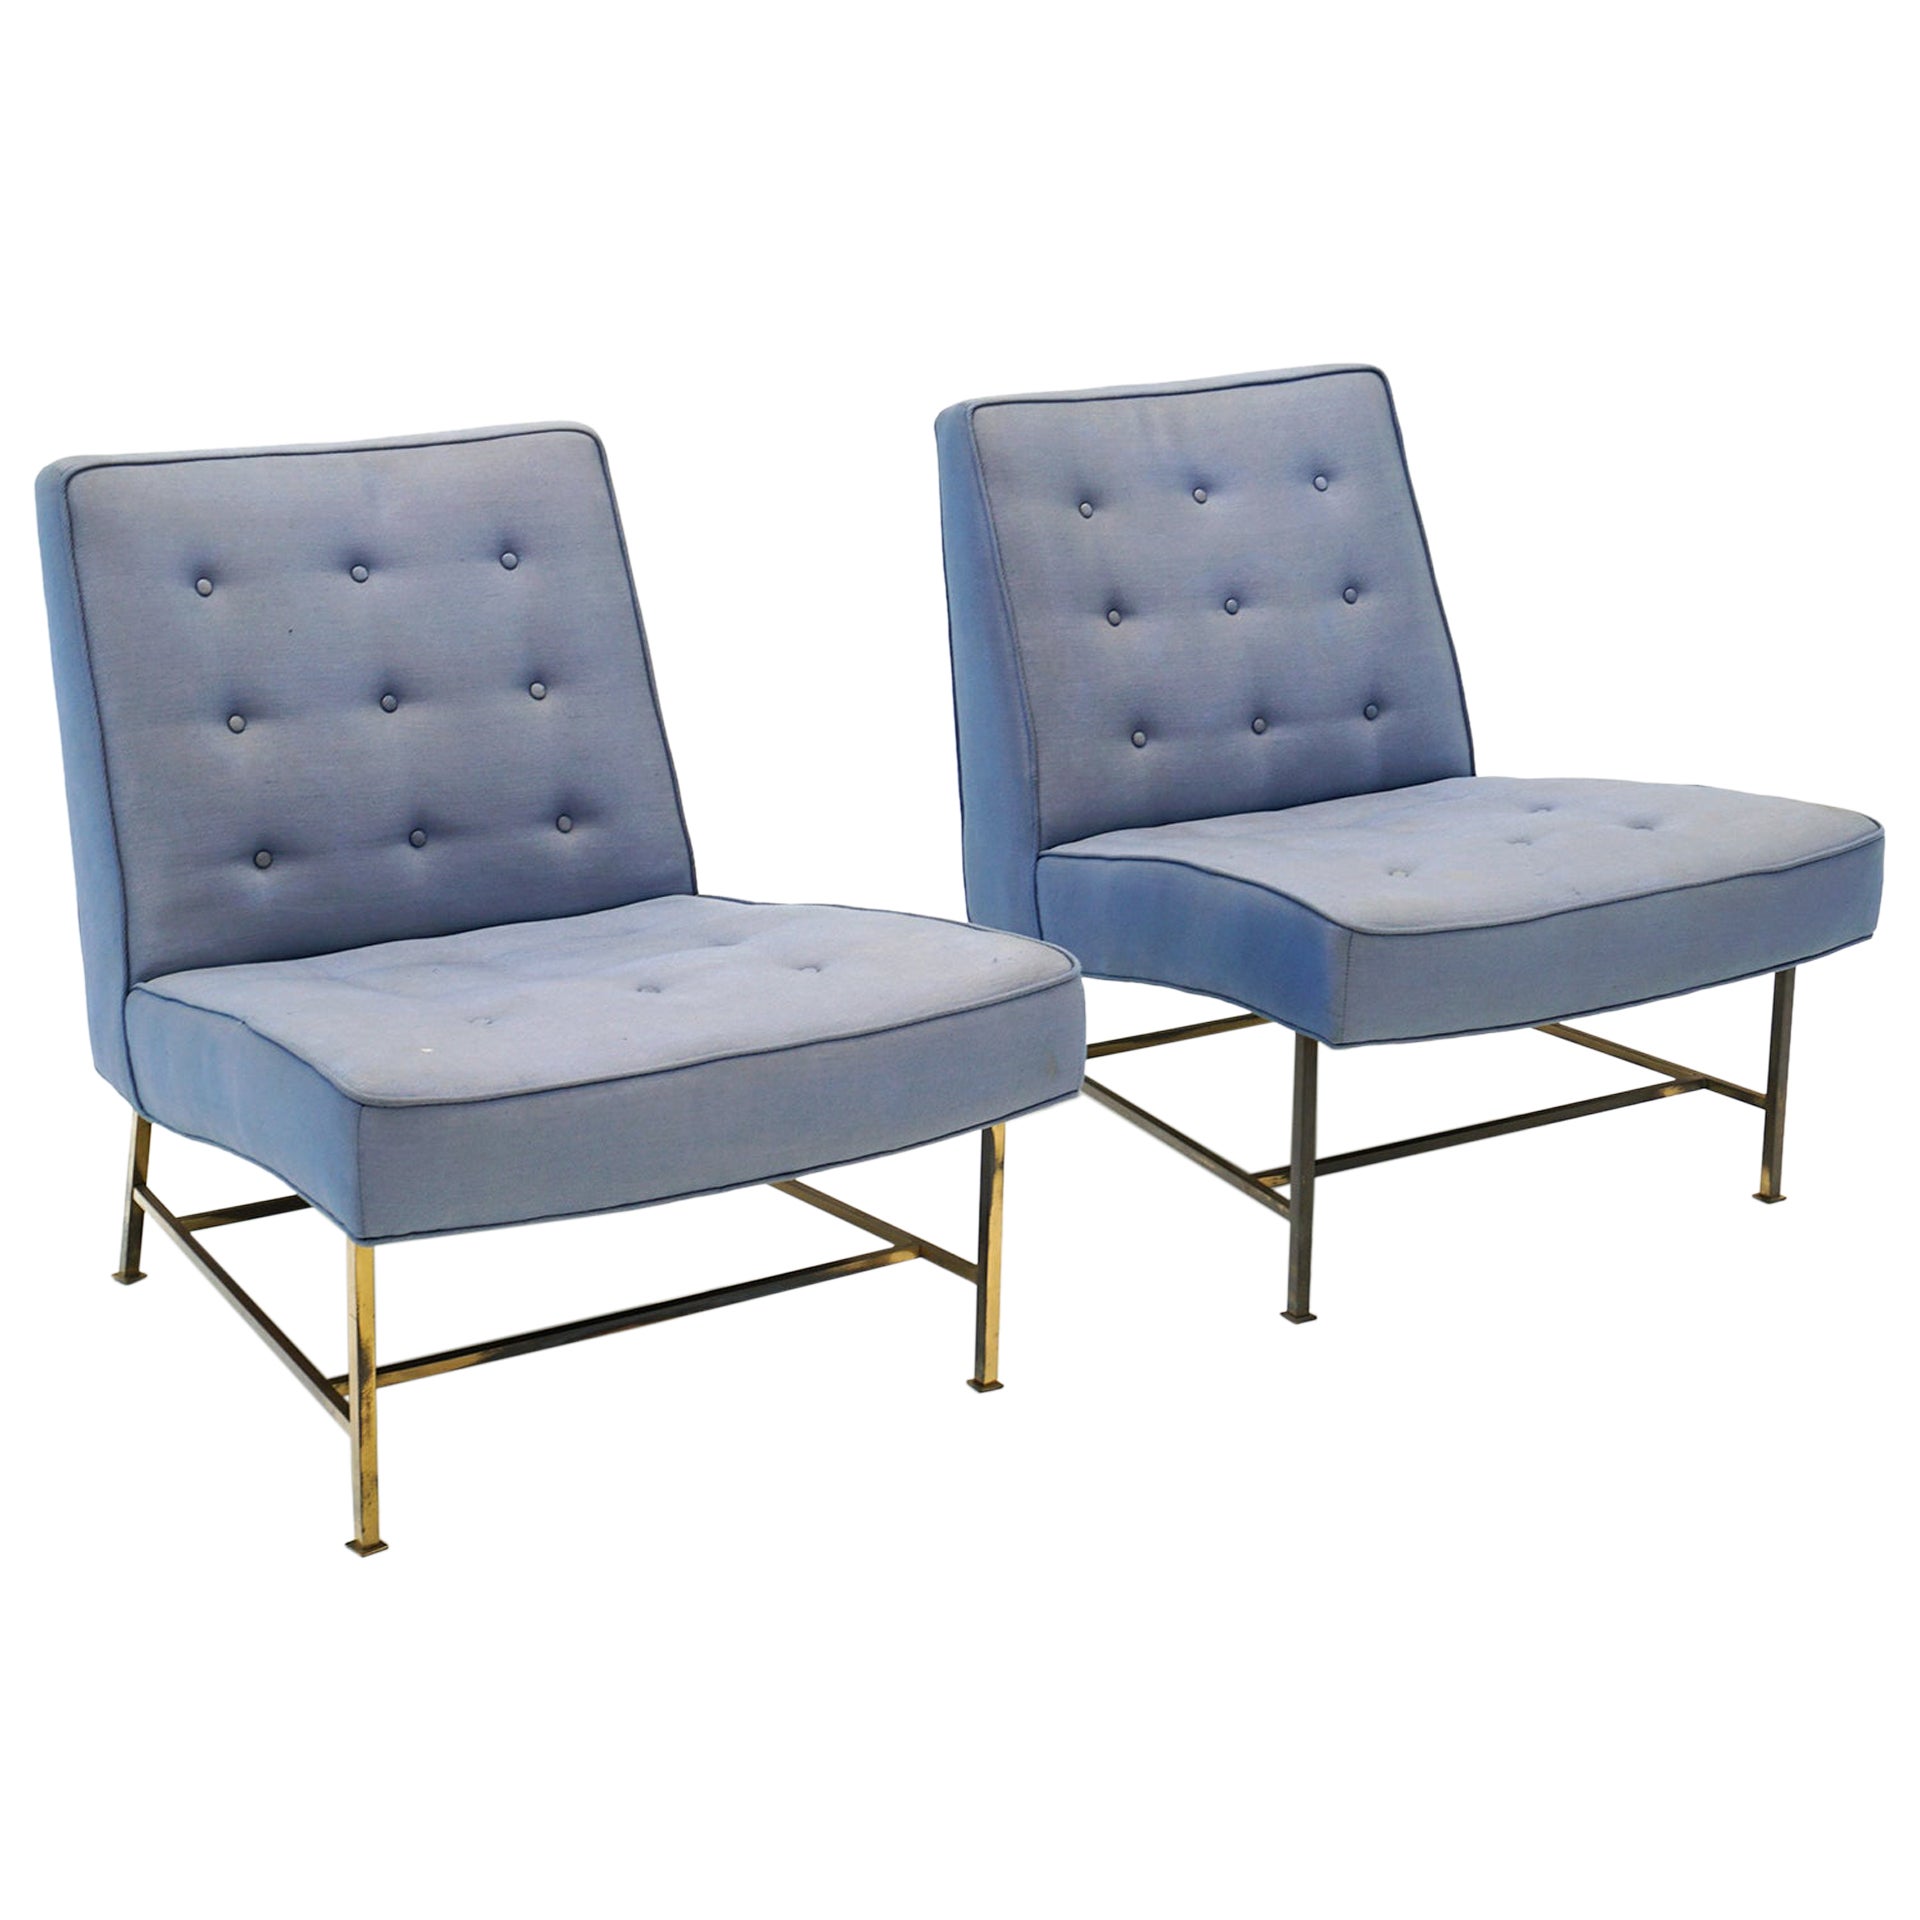 Pair Armless Lounge / Slipper Chairs with Brass Frames by Harvey Probber